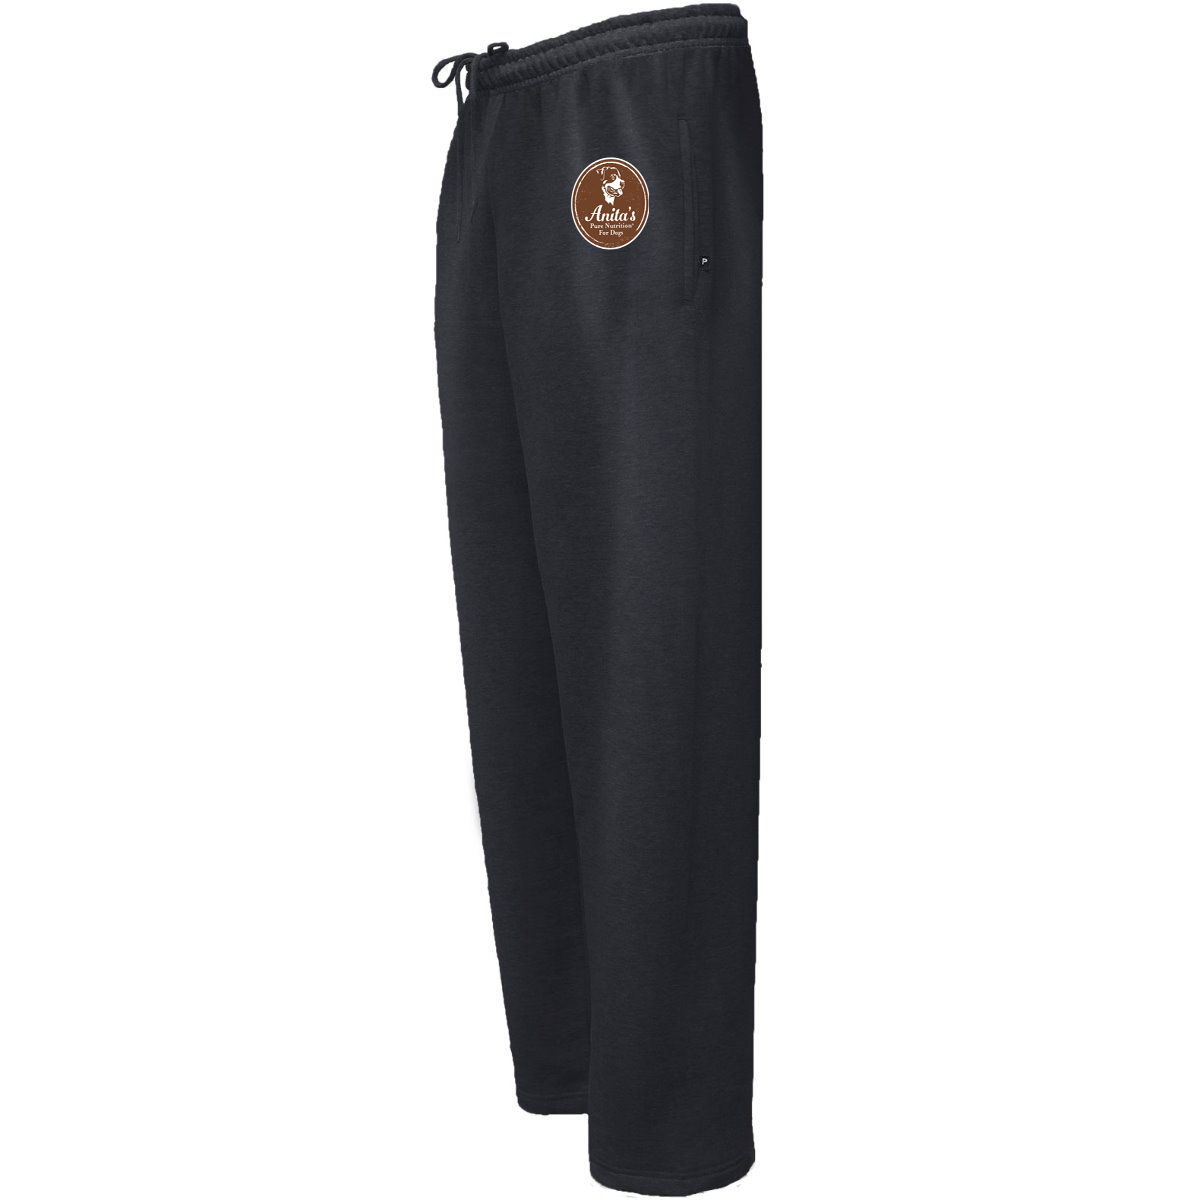 Anita's Pure Nutrition For Dogs Sweatpants